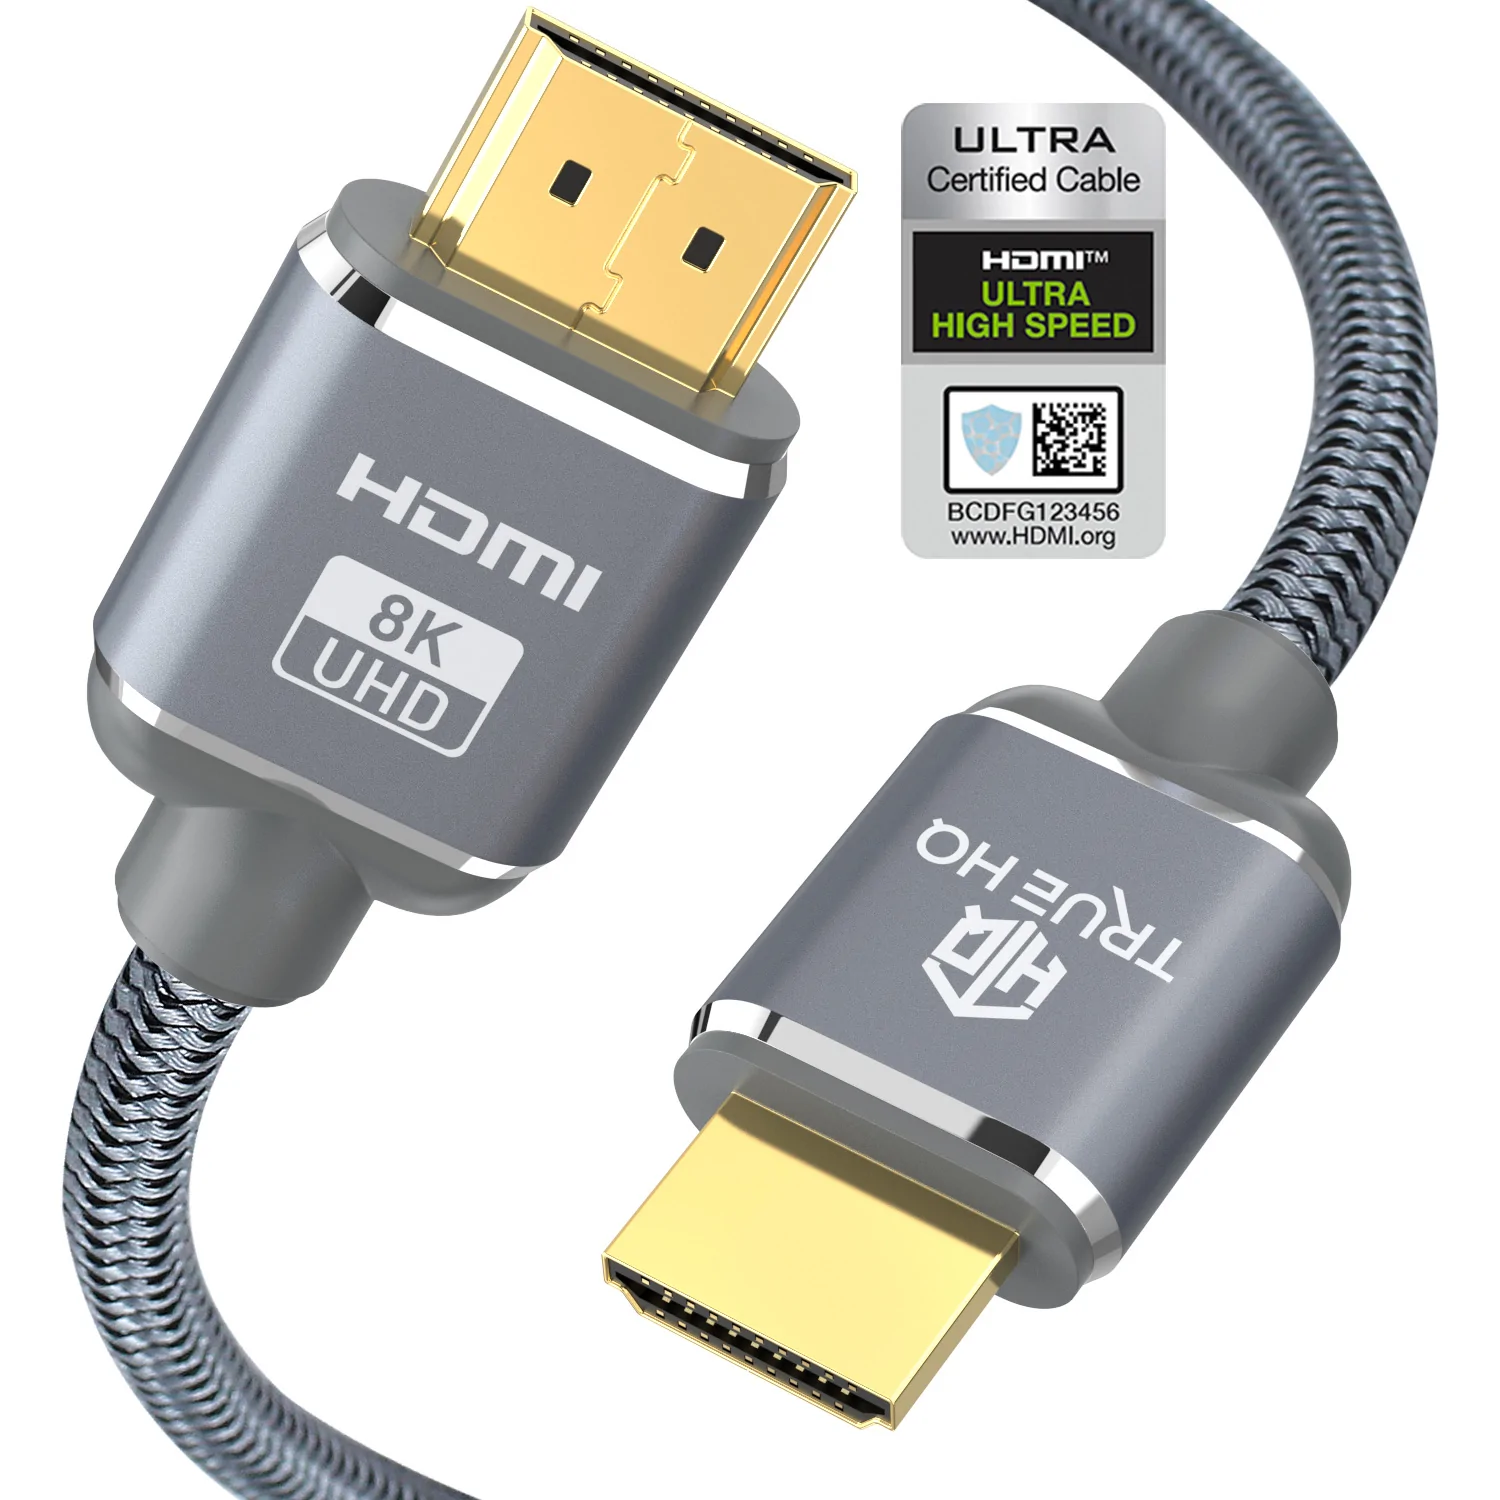 Replace The HDMI Cable